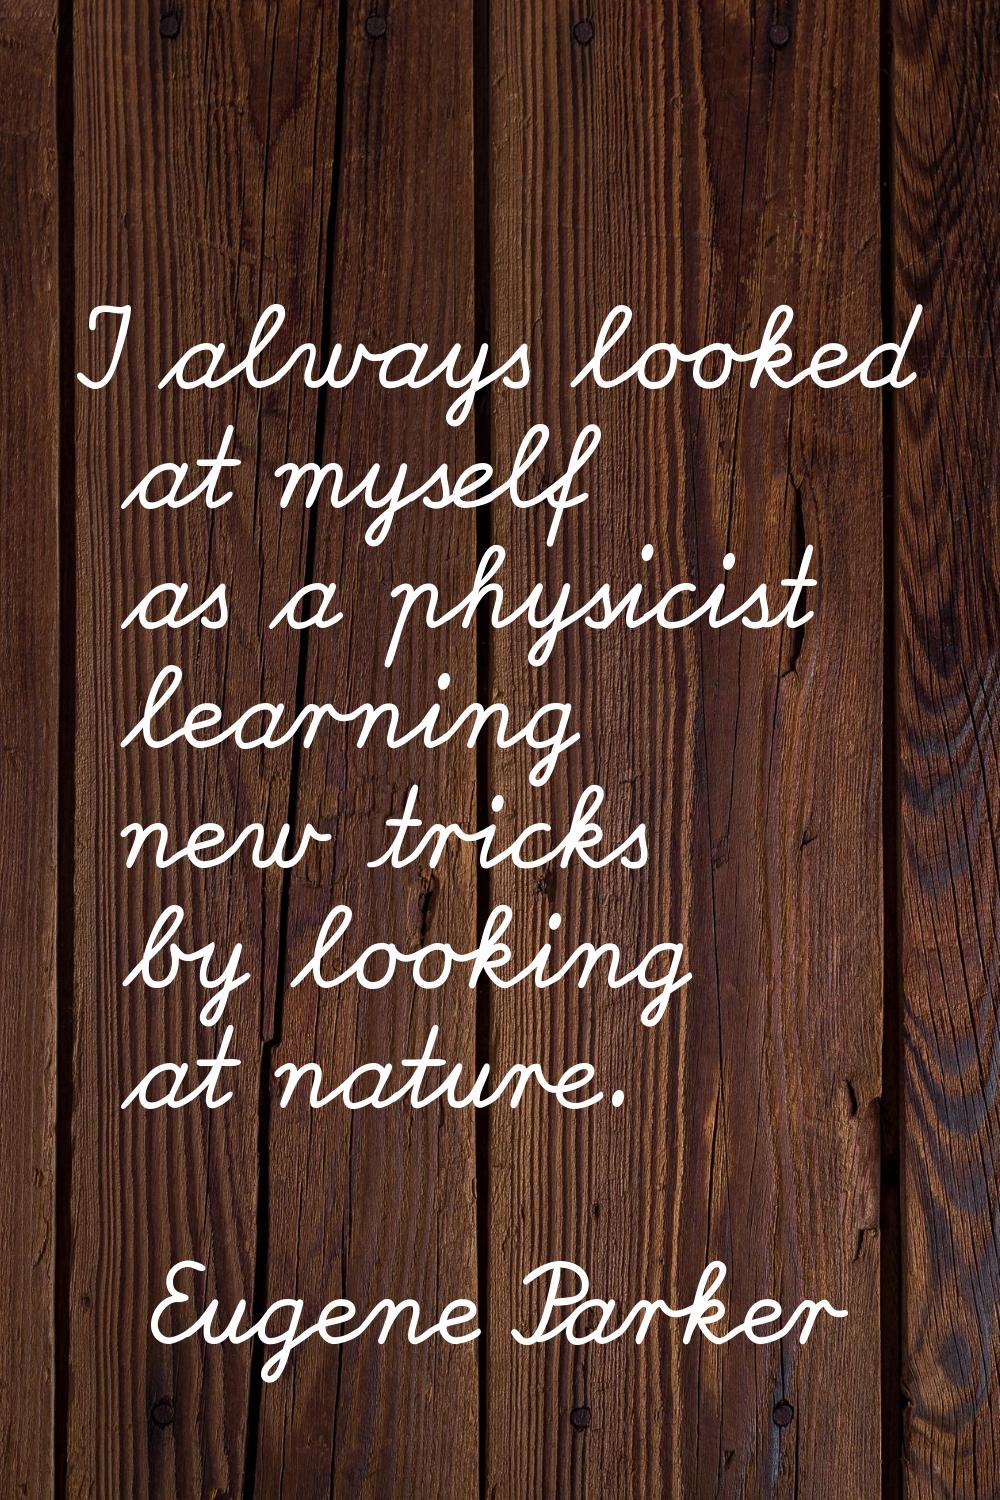 I always looked at myself as a physicist learning new tricks by looking at nature.